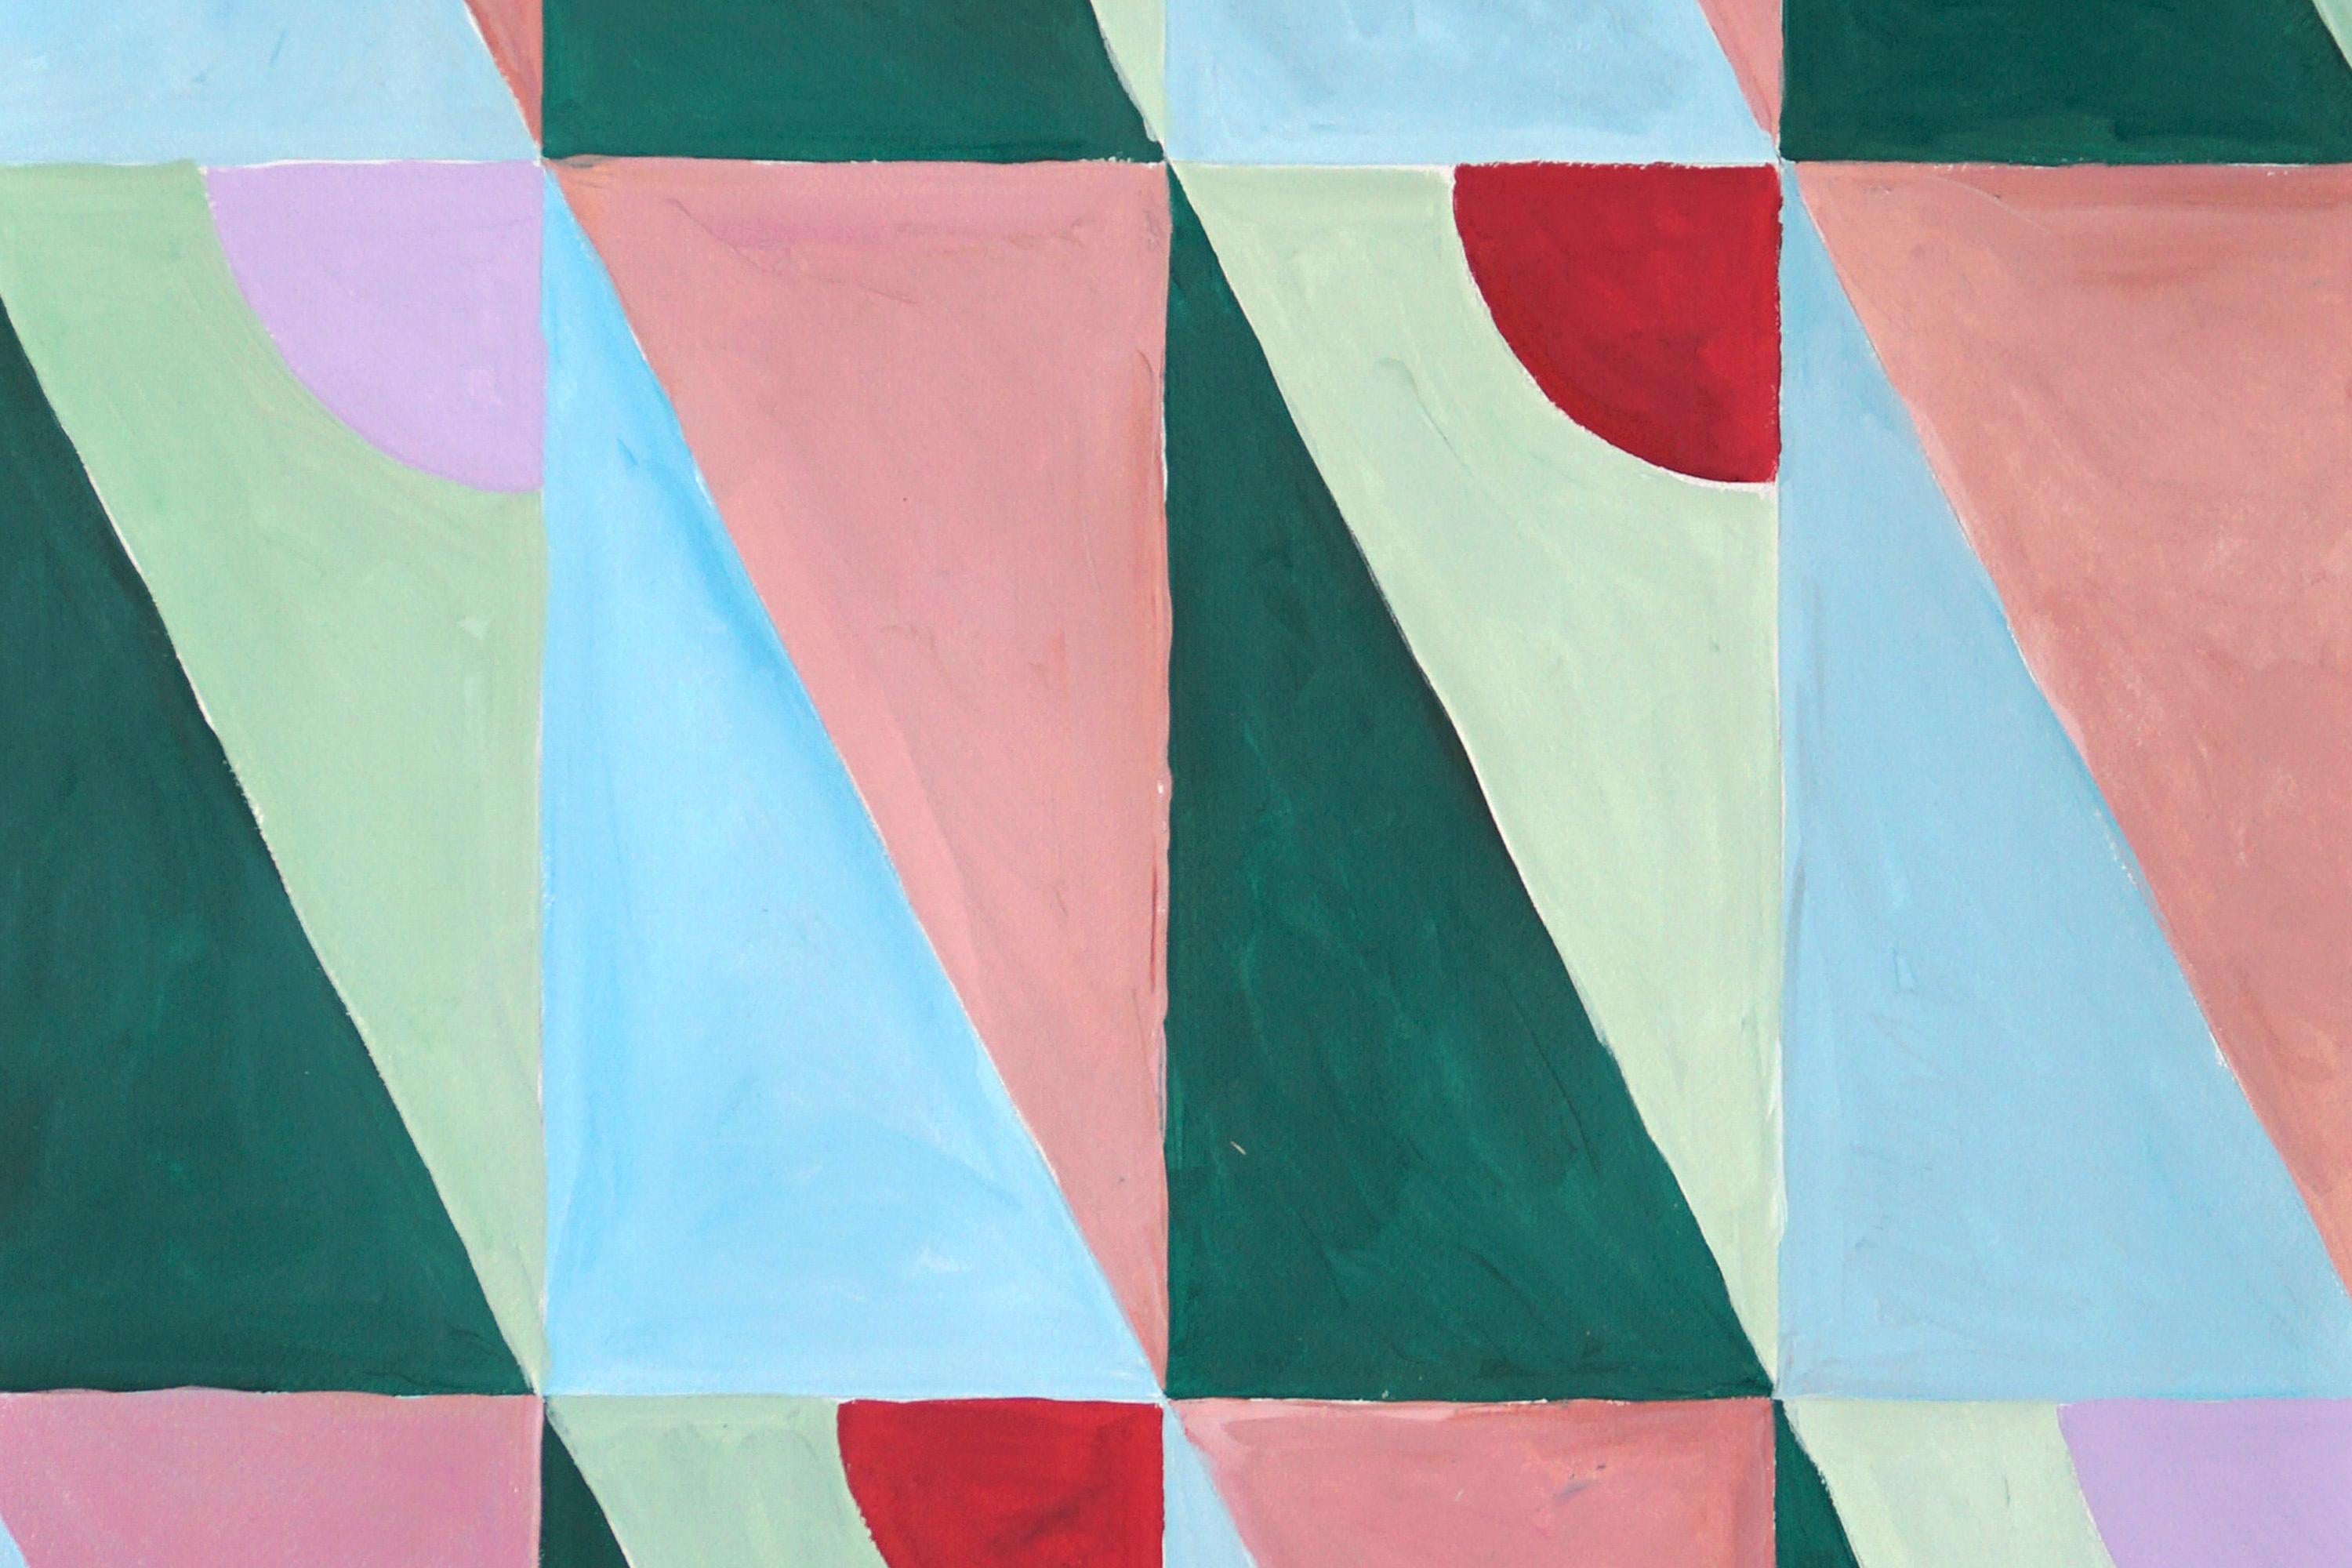 Pastel Tiles Combo Grid, Triangle Tiles Pattern Diptych, Pink and Green Bauhaus  - Gray Landscape Painting by Natalia Roman